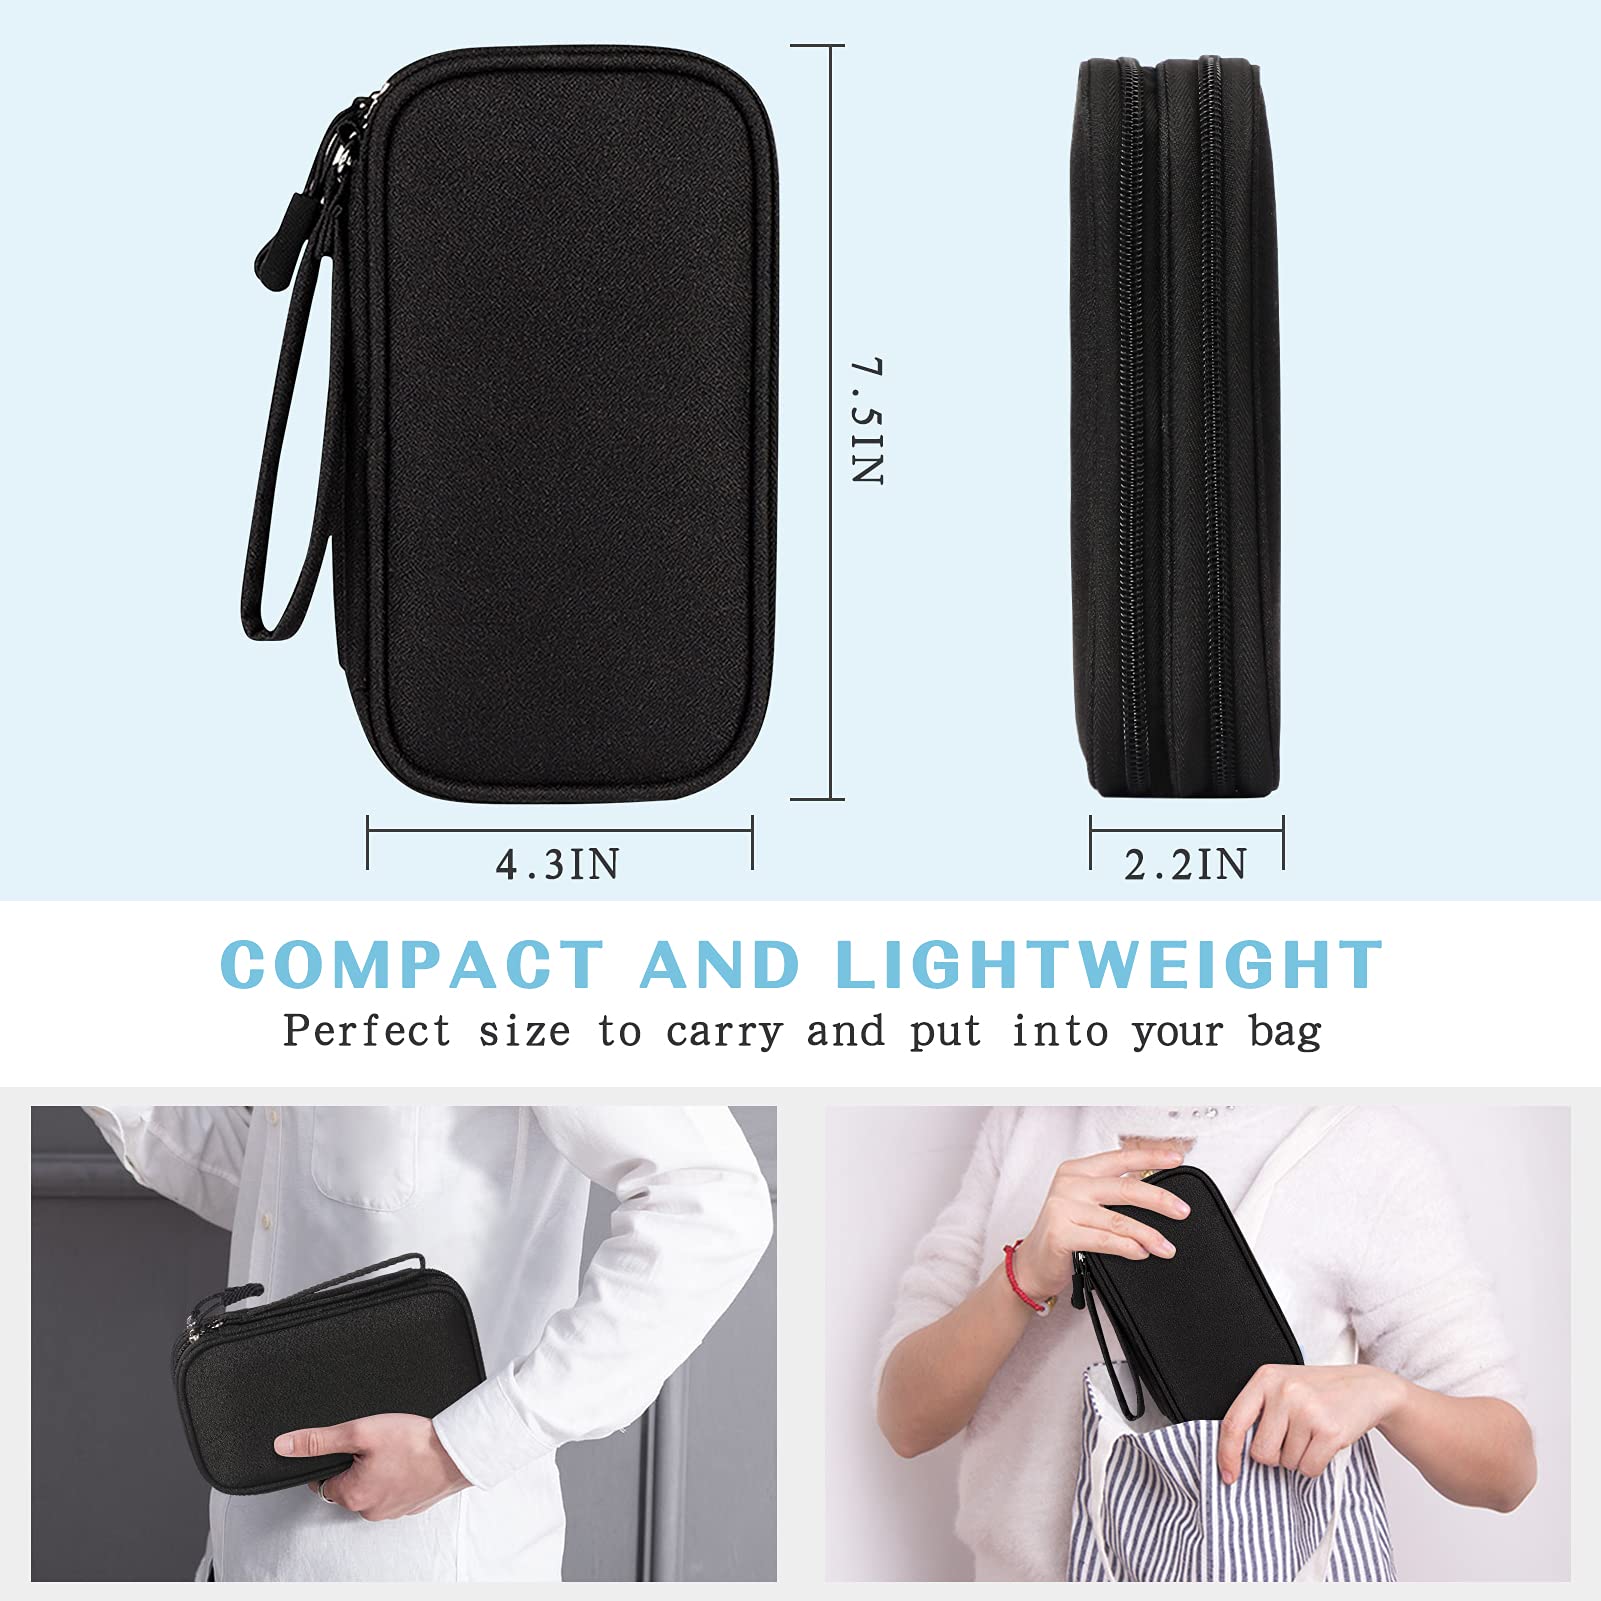 FYY Electronic Organizer Set, Small Cable Case for Daily Use and Travel, Middle Bag for Organisation at Home and Office